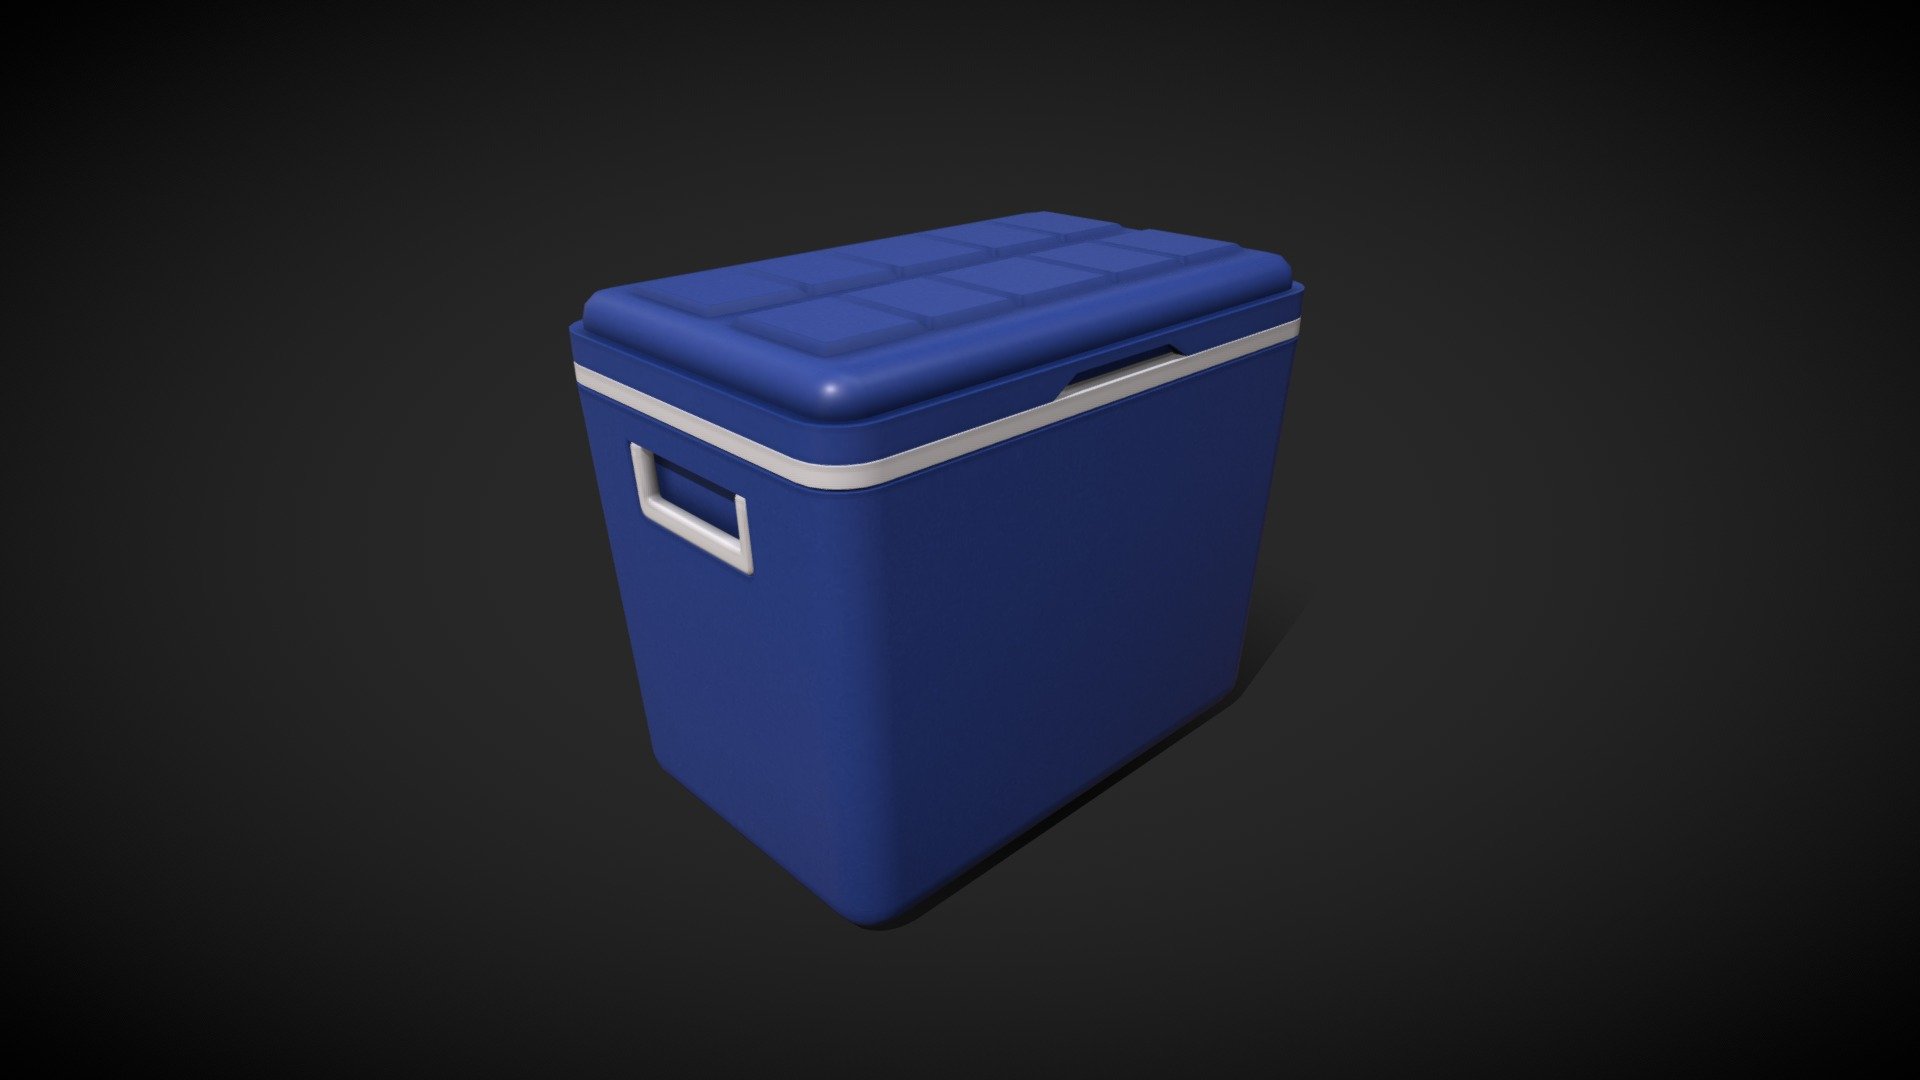 A blue cooler box to keep beverages and produce cool during hot summer days.

2K textures are included 3d model